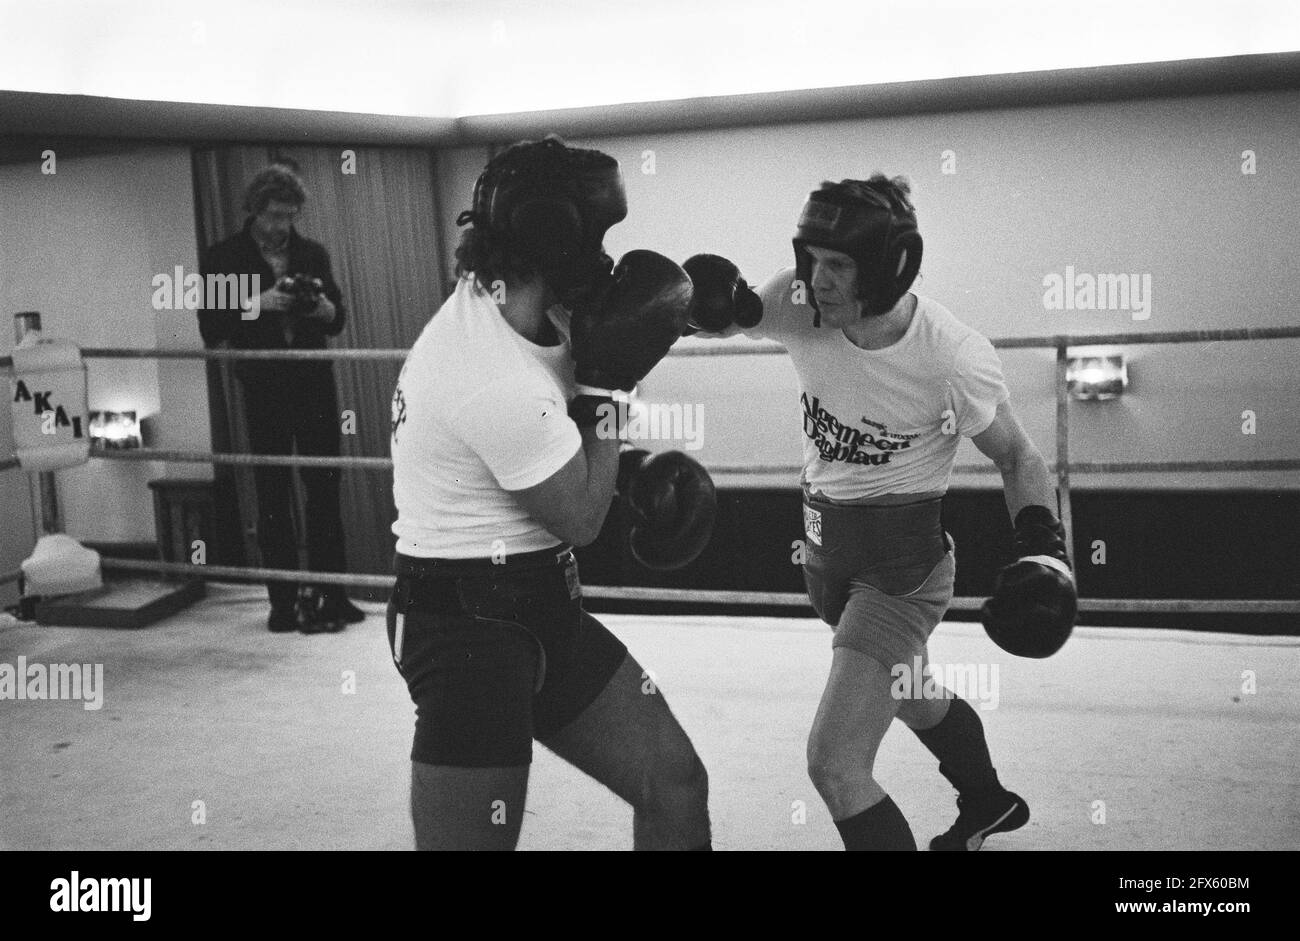 Boxing, training Rudi Koopmans in connection with fight o European title half-heavyweight against Aldo Traversaro, Rudi Koopmans (r) with, February 1, 1979, BOKSEN, TITELS, The Netherlands, 20th century press agency photo, news to remember, documentary, historic photography 1945-1990, visual stories, human history of the Twentieth Century, capturing moments in time Stock Photo